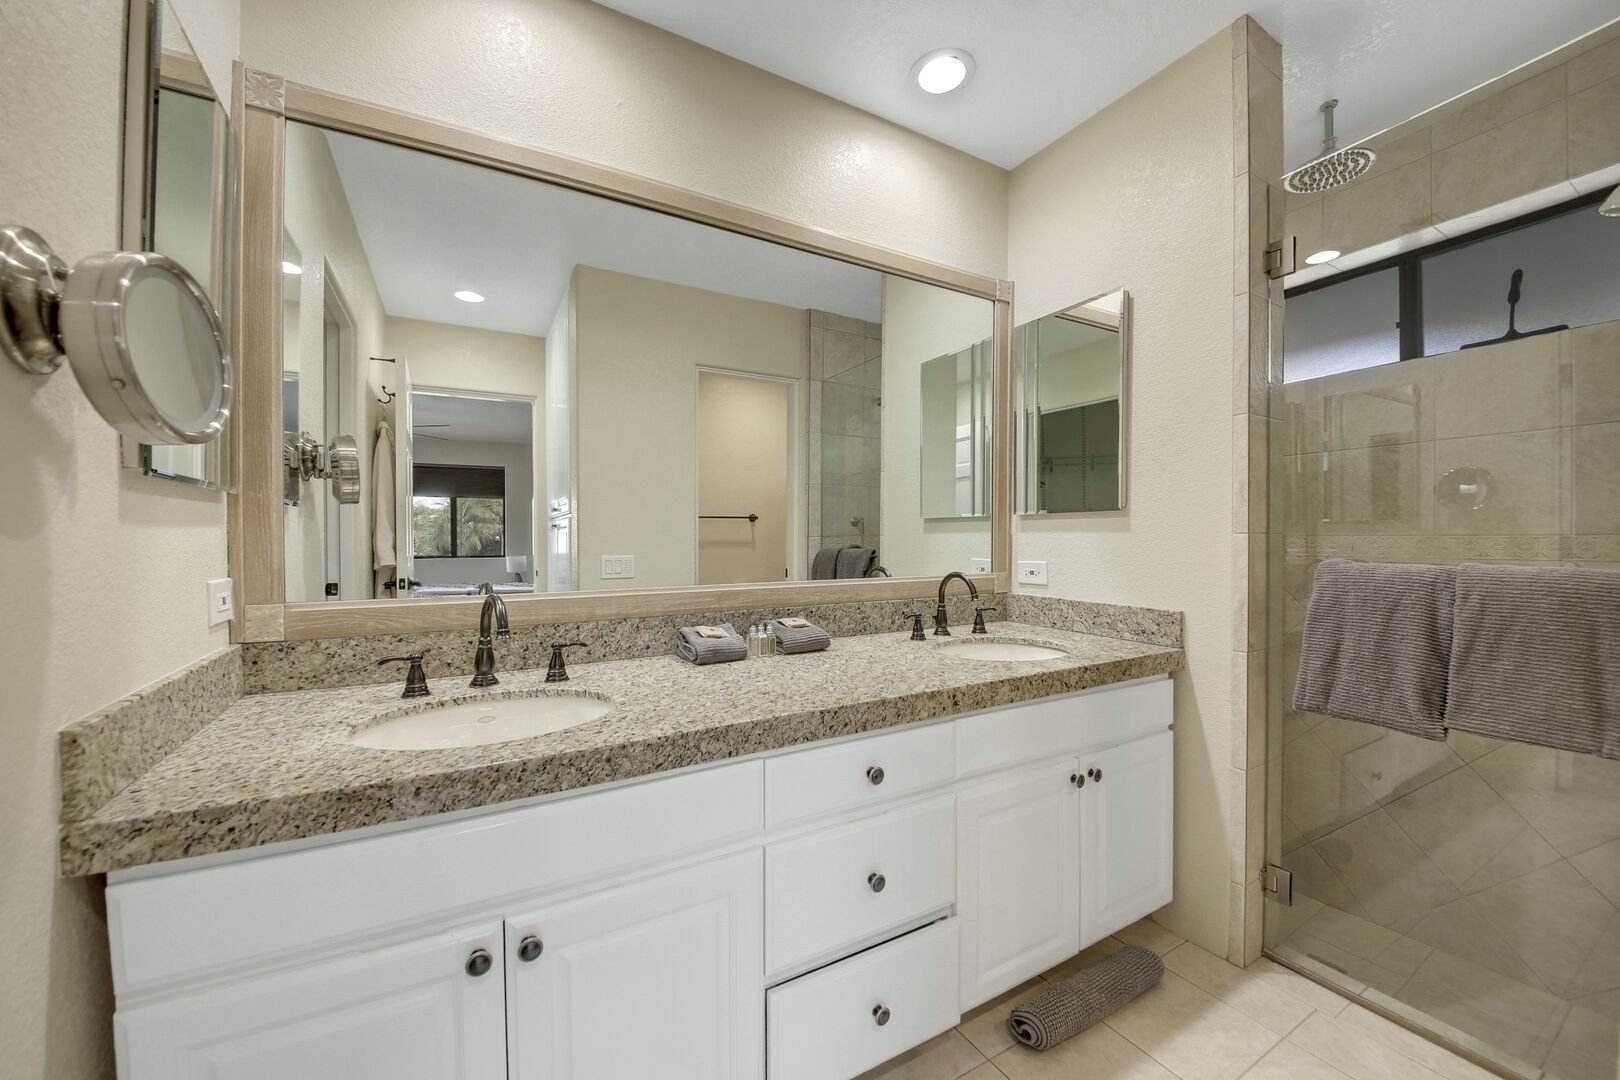 The private, en suite bathroom features a tile shower, and his and her vanity sinks. 